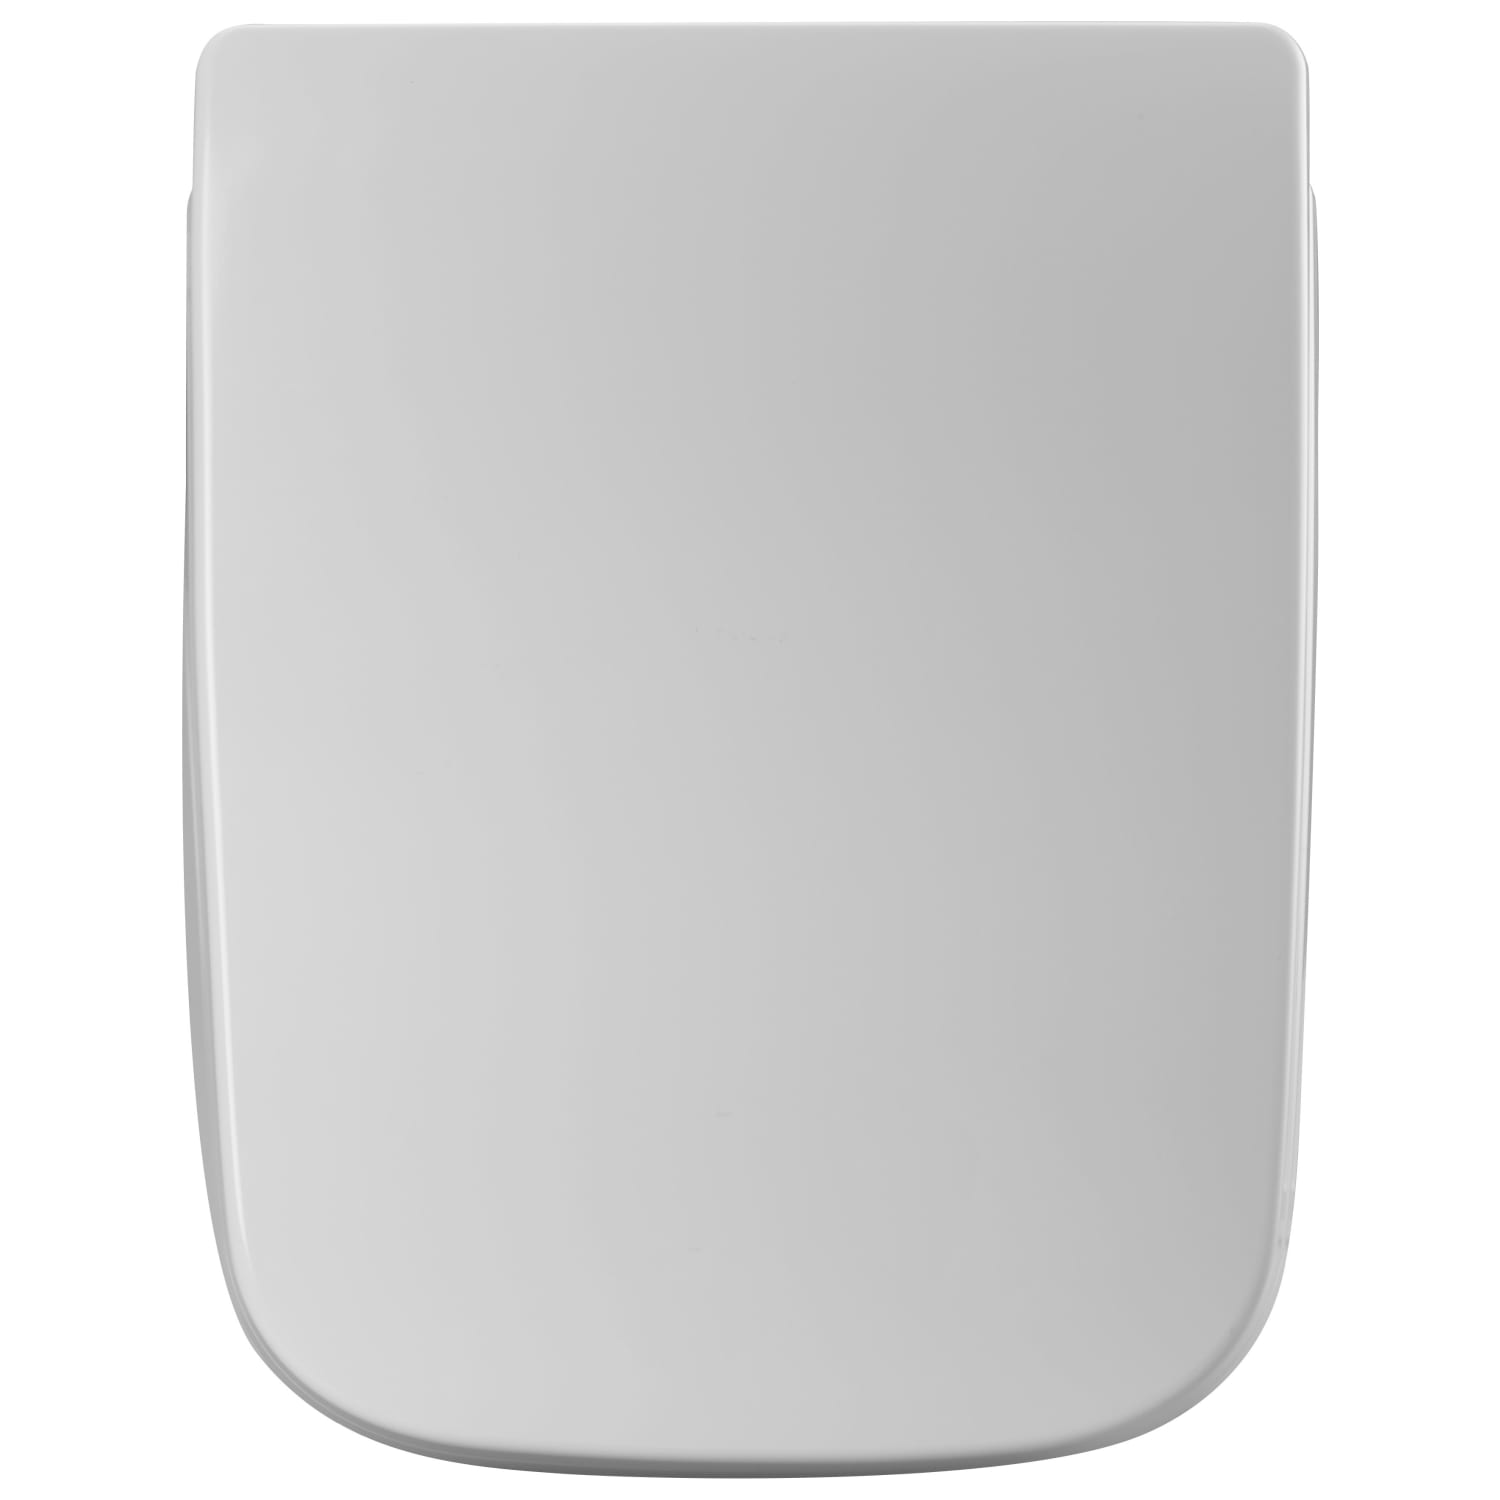 Orchard Wye square thermoset replacement toilet seat with soft